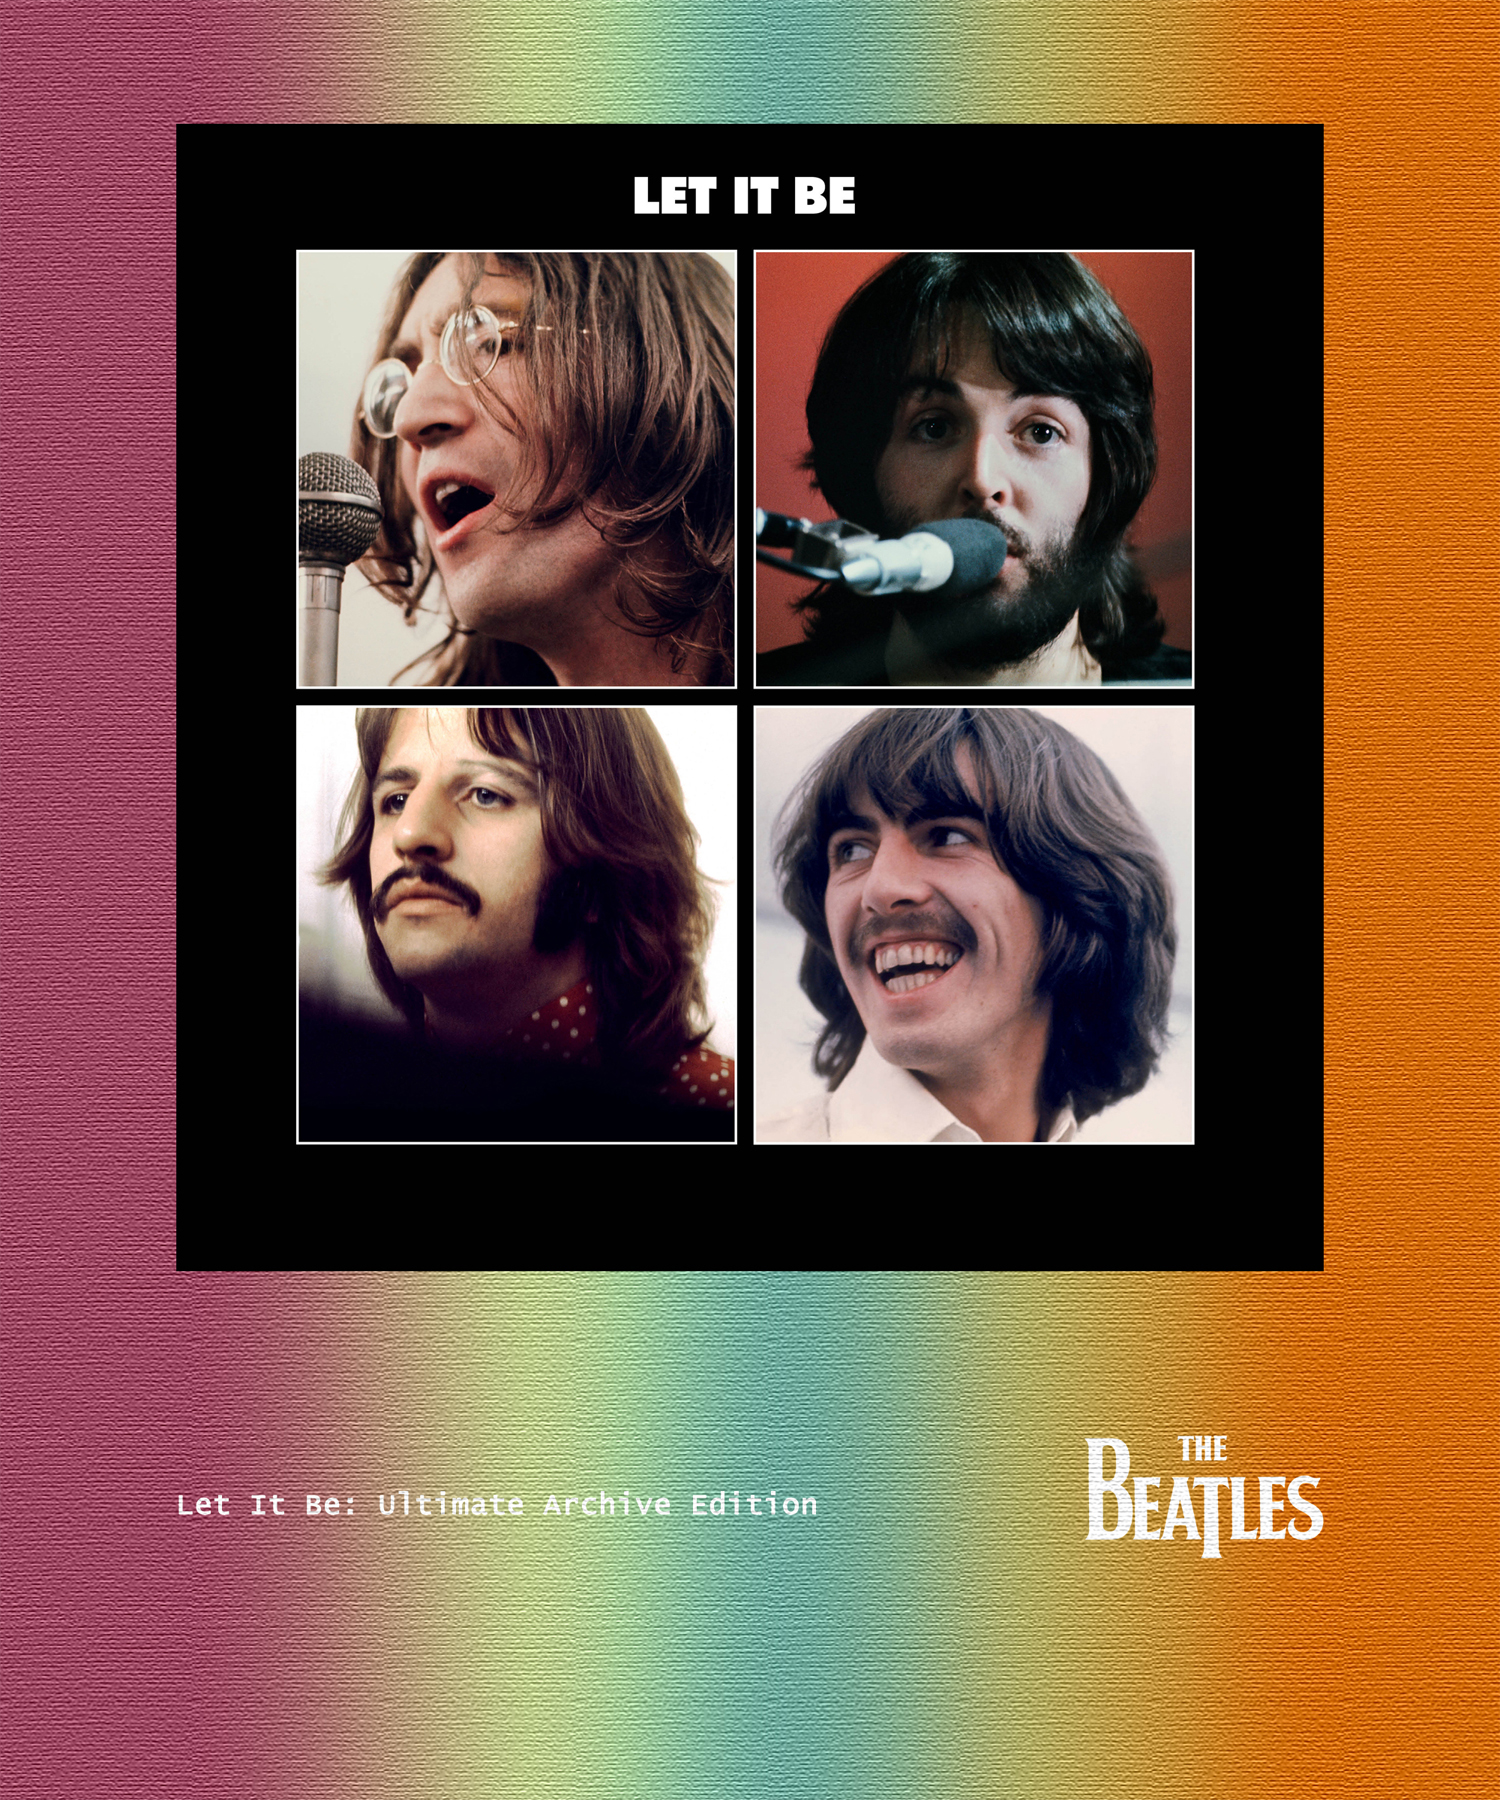 Let It Be：Ultimate Archive Edition.jpg